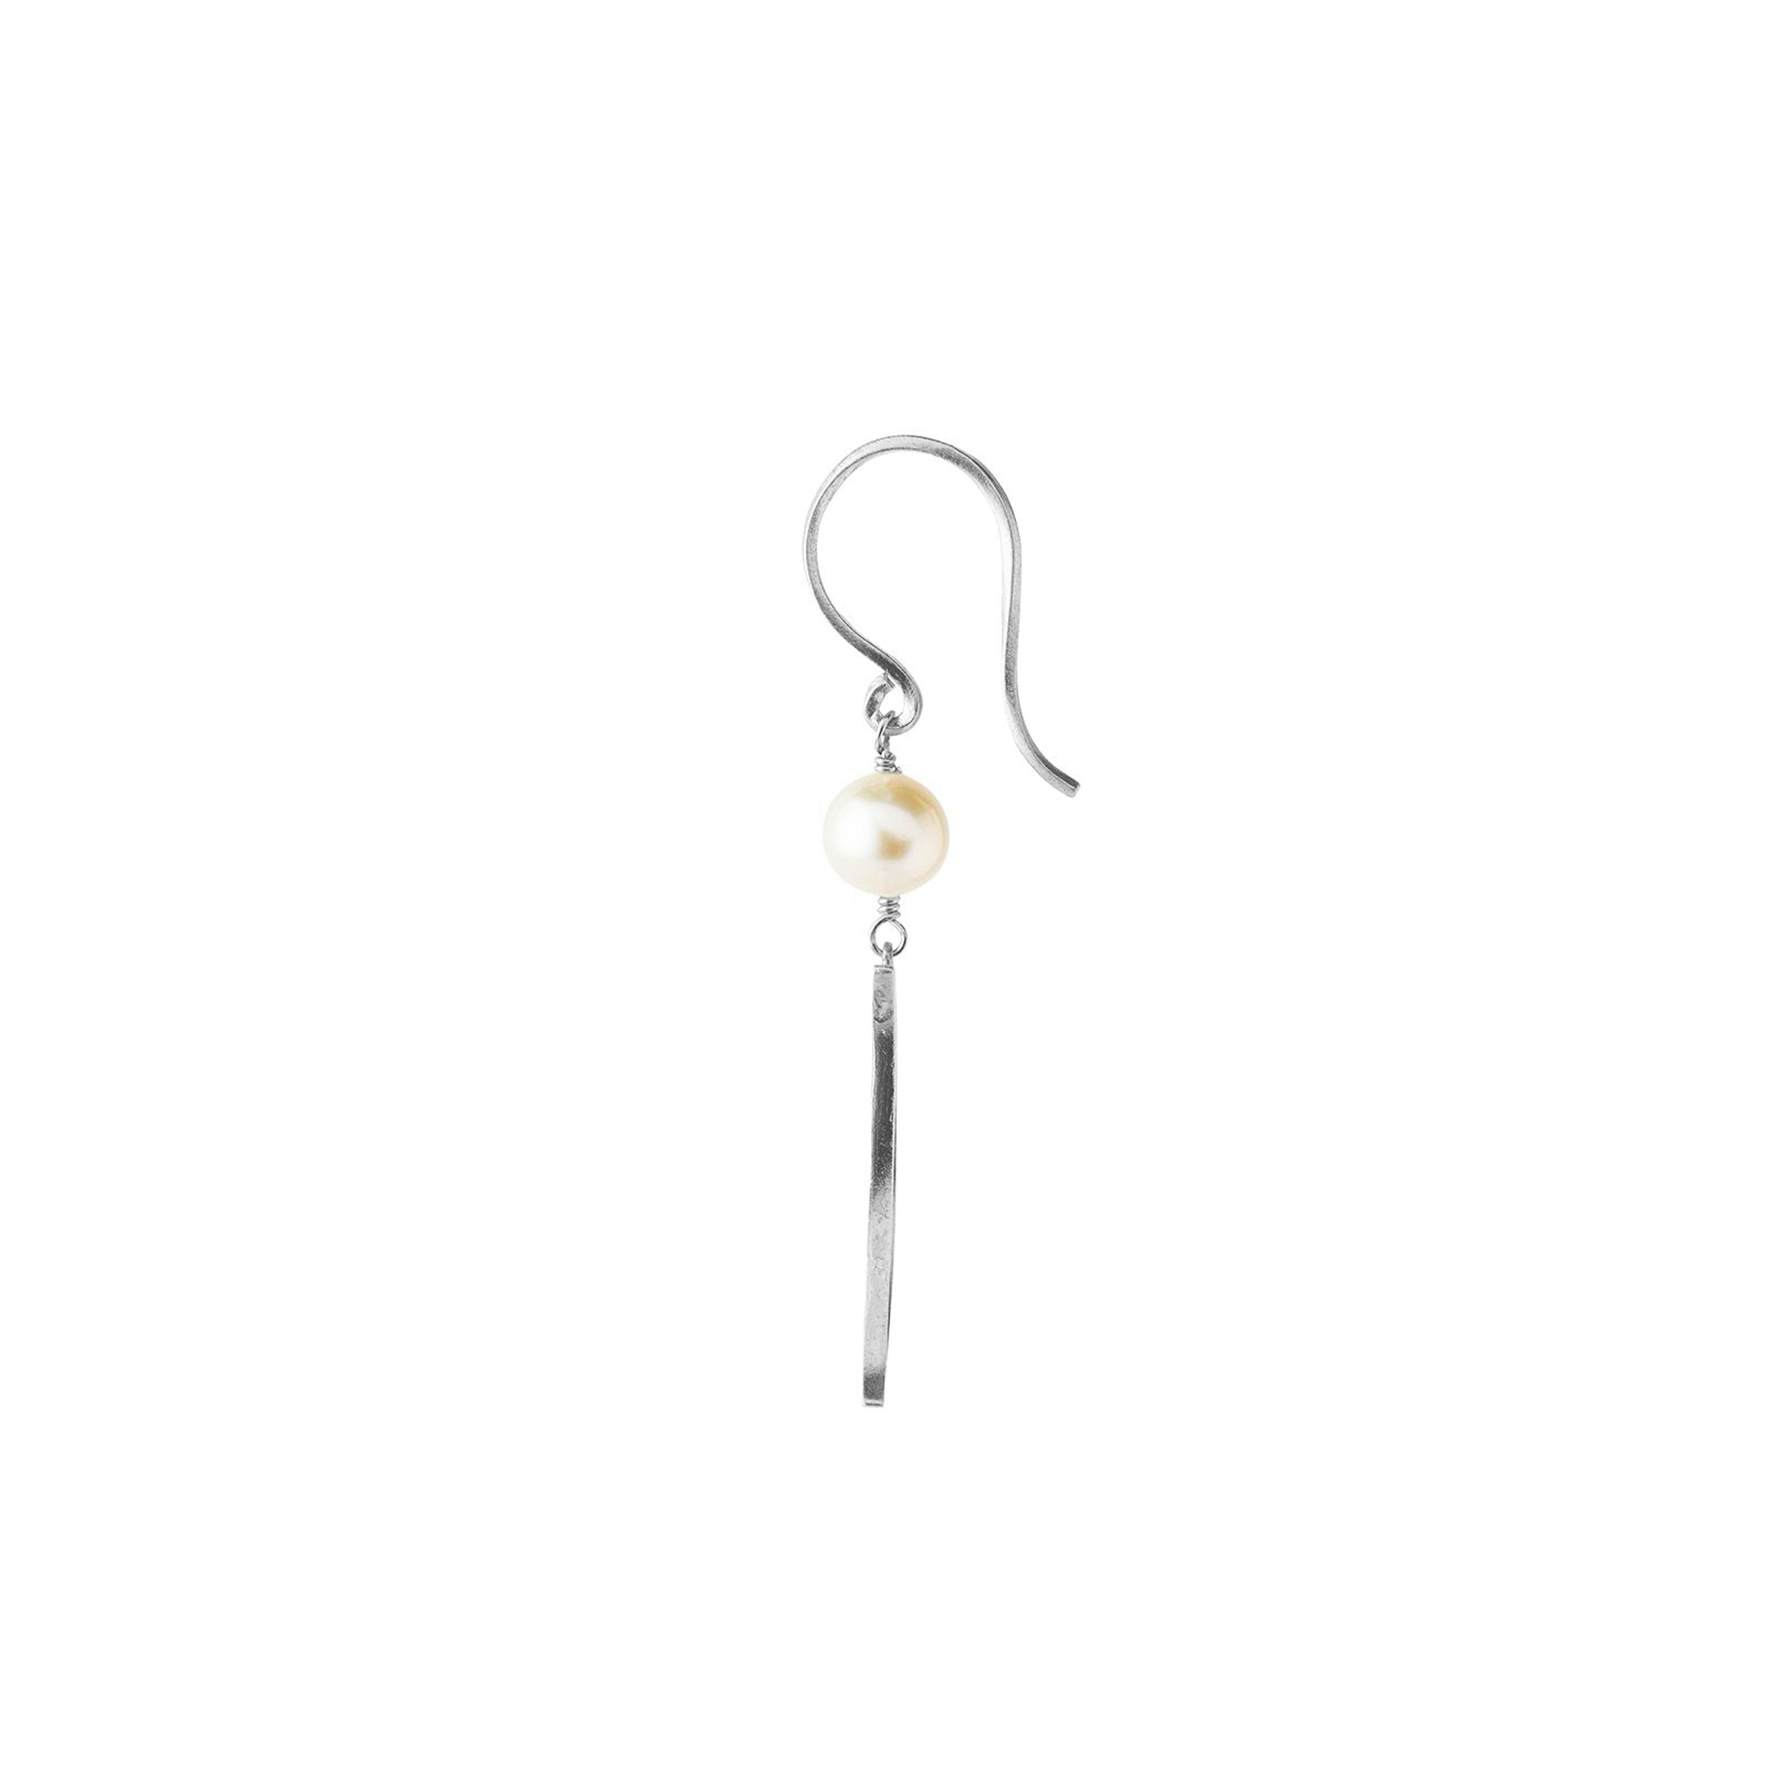 Bella Moon Earring With Pearl von STINE A Jewelry in Silber Sterling 925